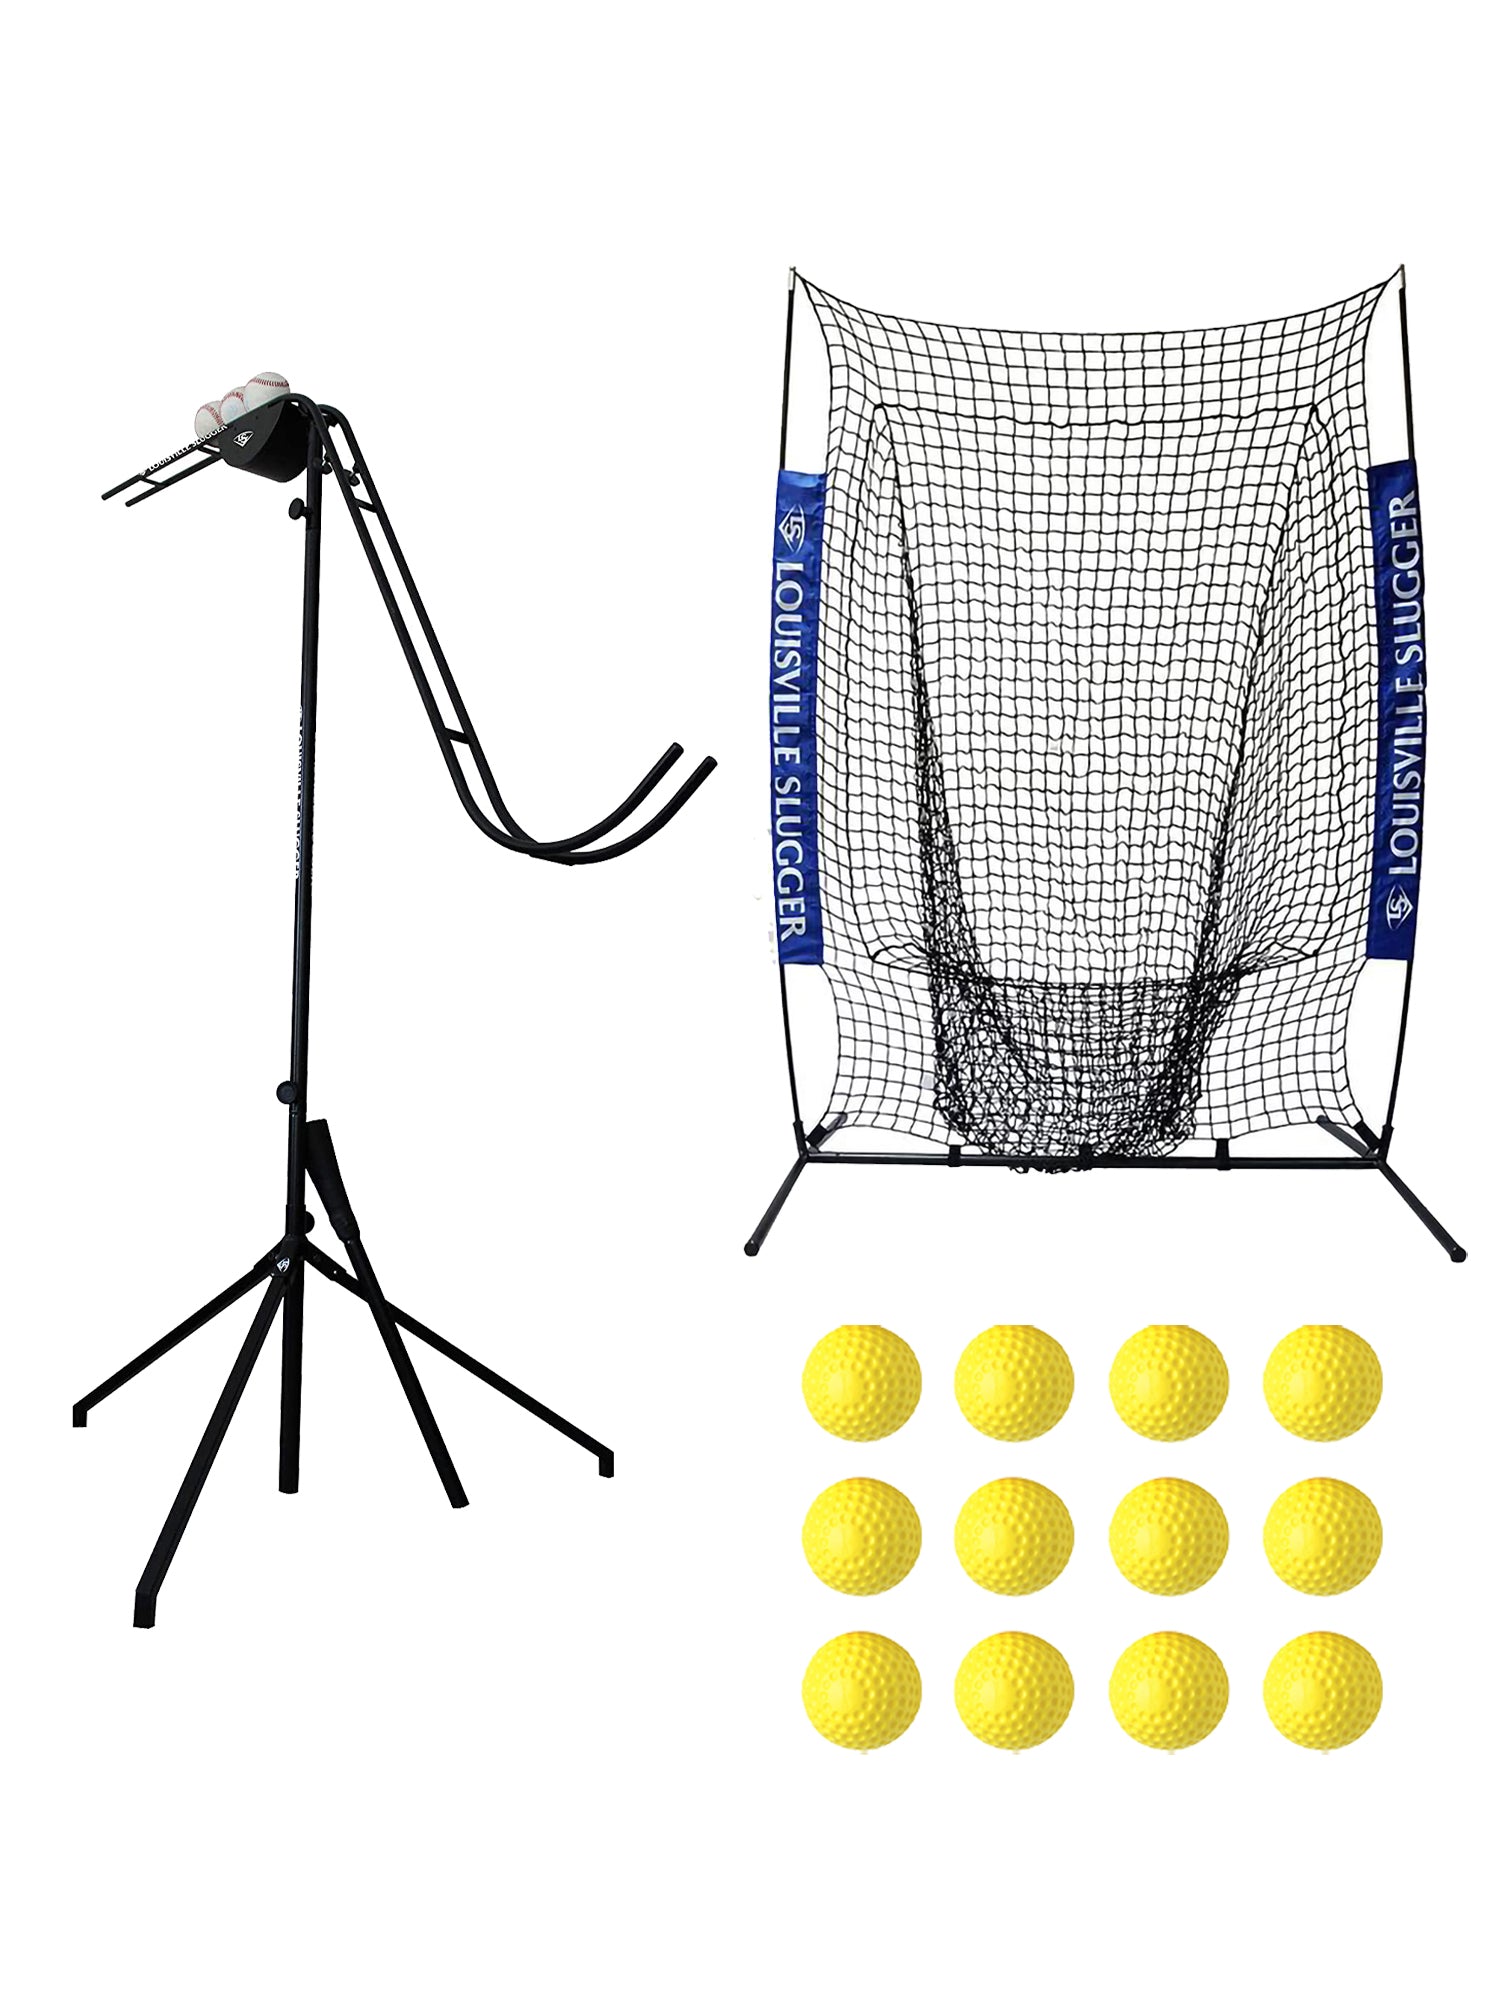 Louisville Slugger Soft Toss Training System, Flex Sock Net and Heater Sports 12-Pack 12 Inch Dimpled Pitching Machine Softballs Bundle - Pro-Distributing